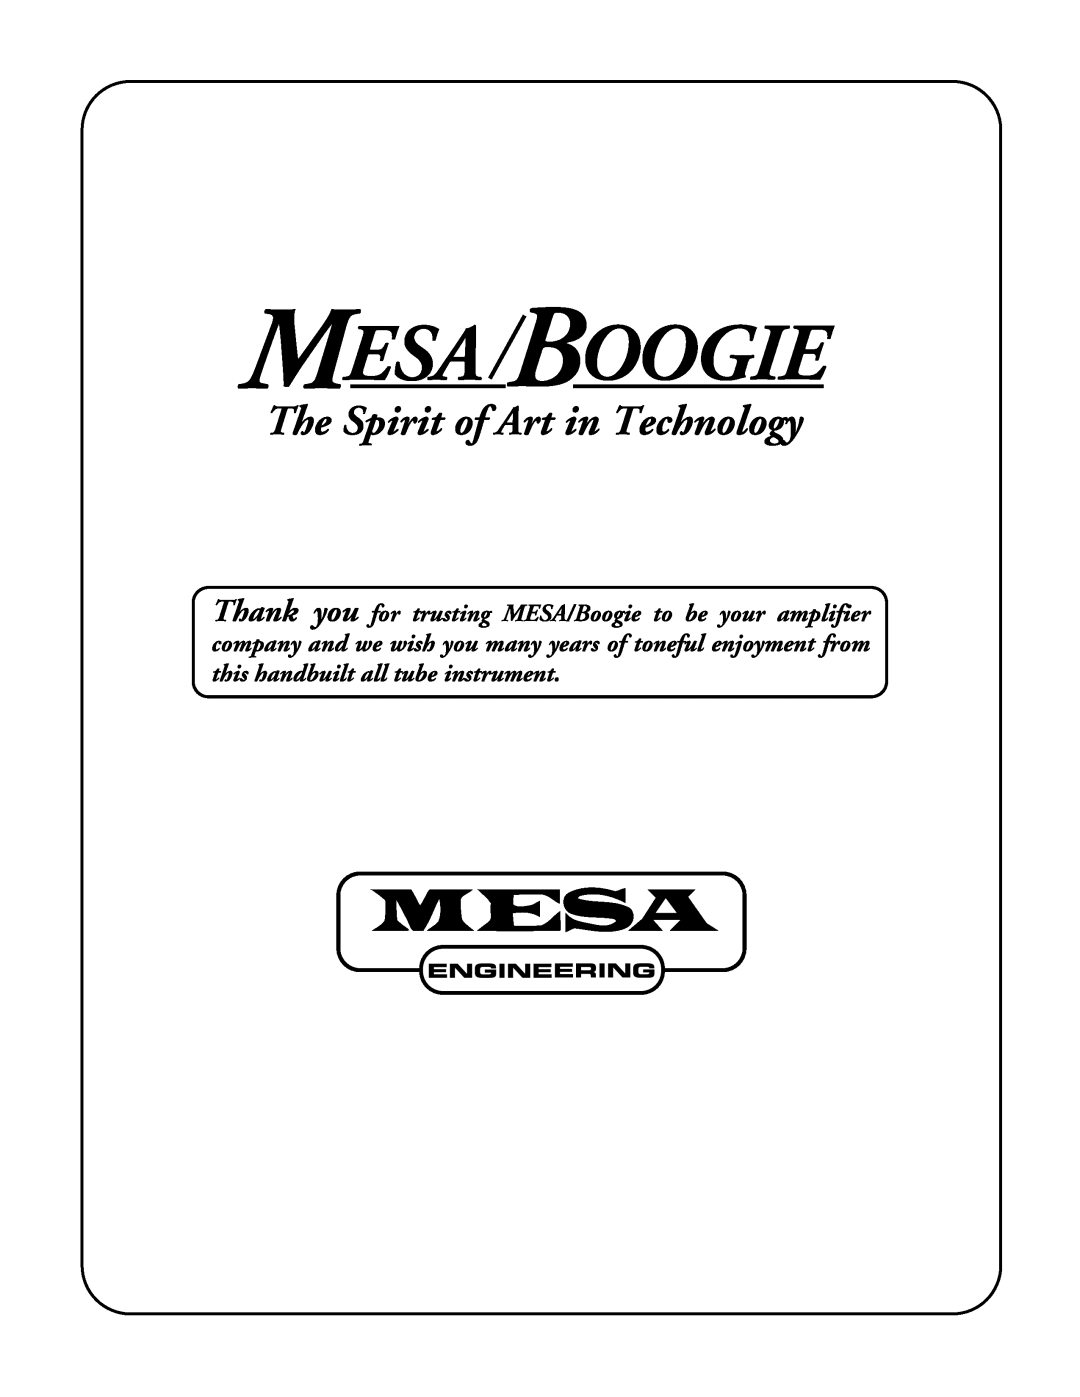 Mesa/Boogie MARK 1 owner manual Mesa Boogie, The Spirit of Art in Technology 